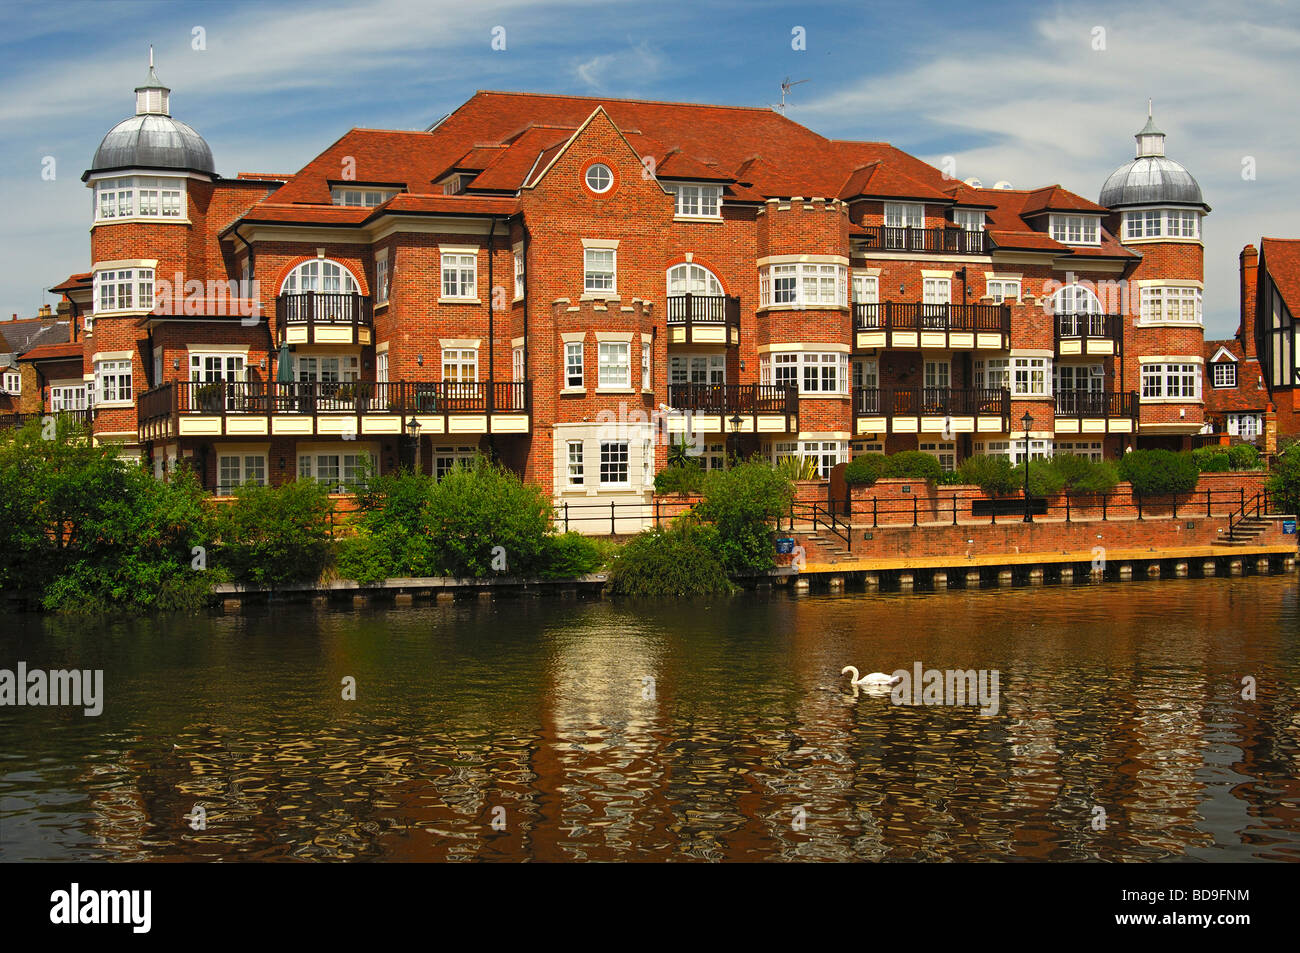 Apartment building in a prime residential area at the banks of the River Thames in Eton, United Kingdom Stock Photo